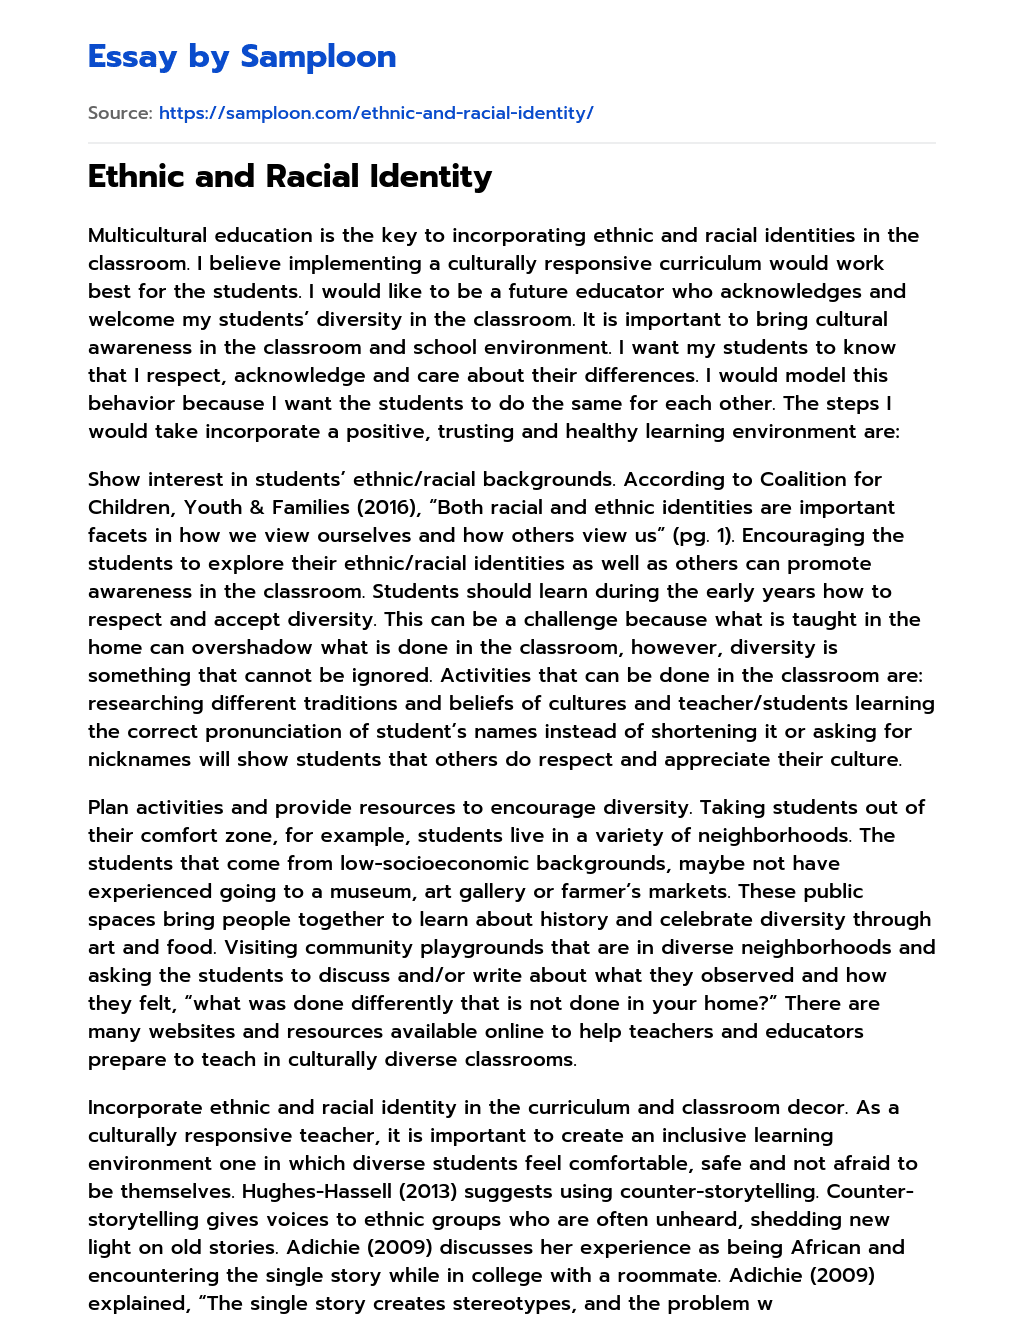 Ethnic and Racial Identity essay